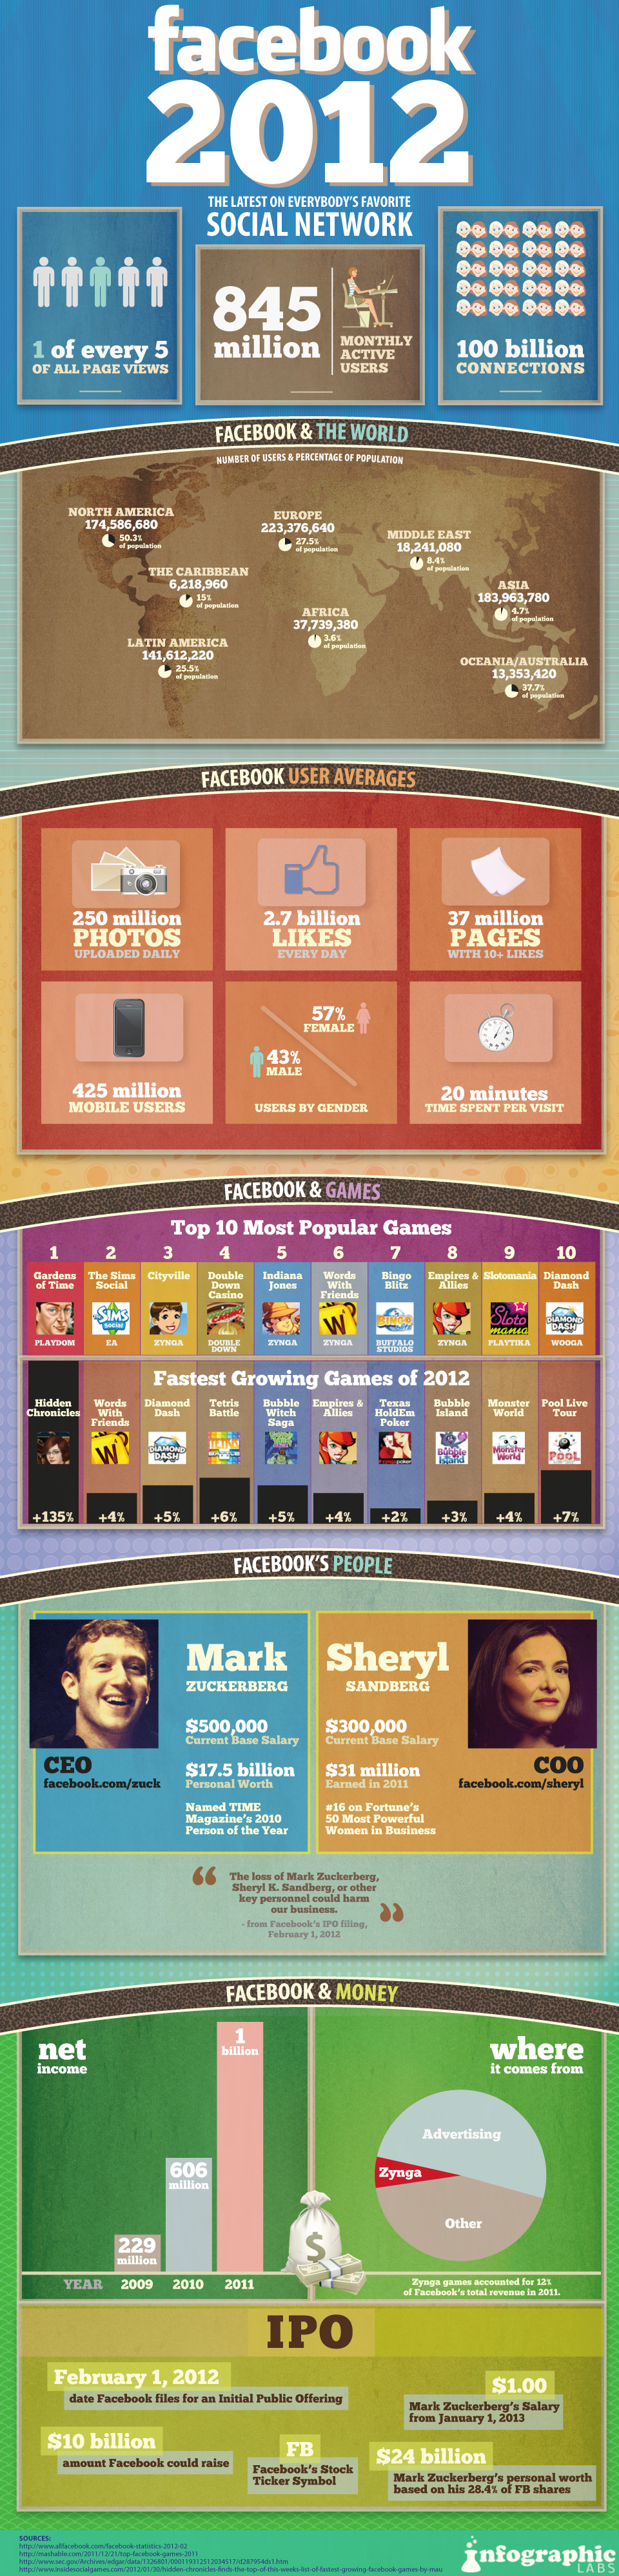 Facebook In 2012 [Infographic]